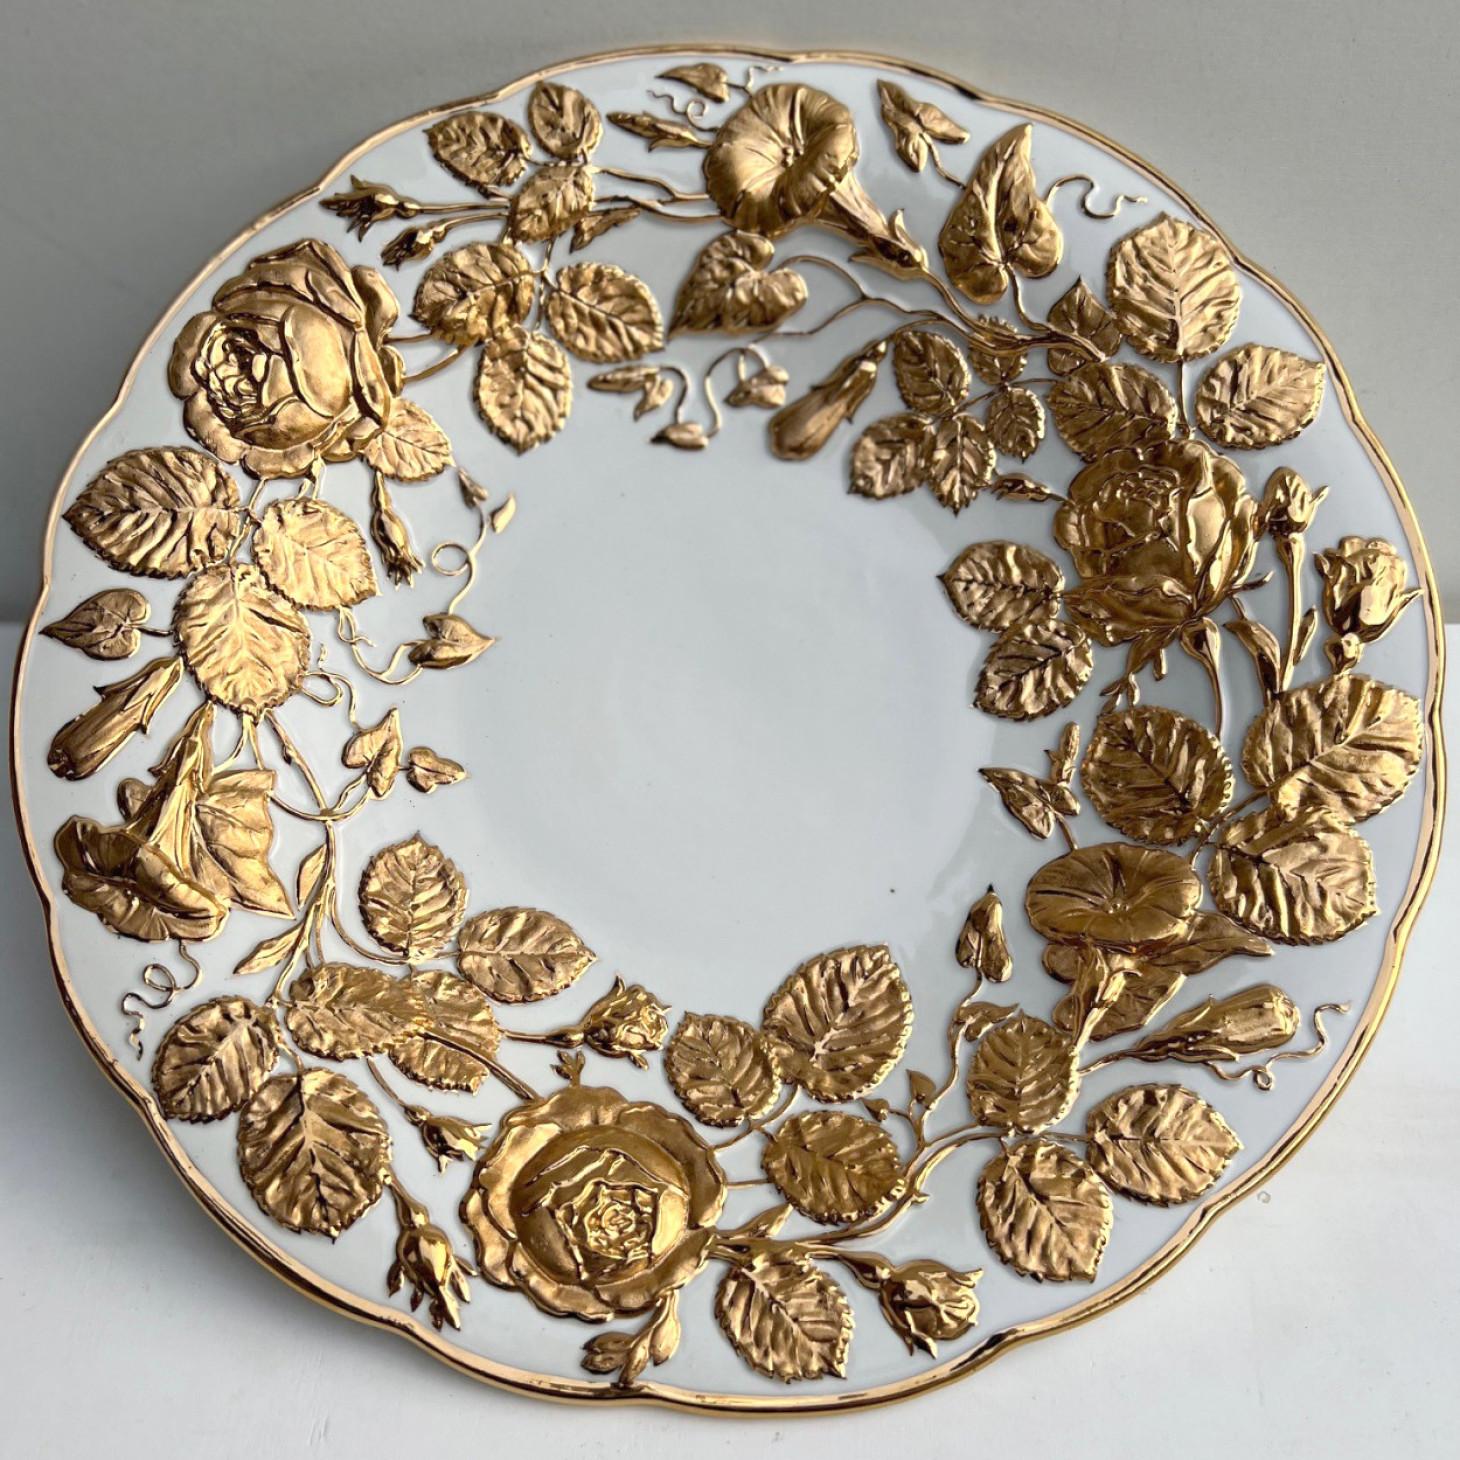 Porcelain plate with a rich gold decor, made by Meissen Porcelain, Germany in around 1950.

It was the first porcelain factory in Europe to produce true porcelain outside of Asia.

The plate is in excellent condition. The Meissen mark is shown on